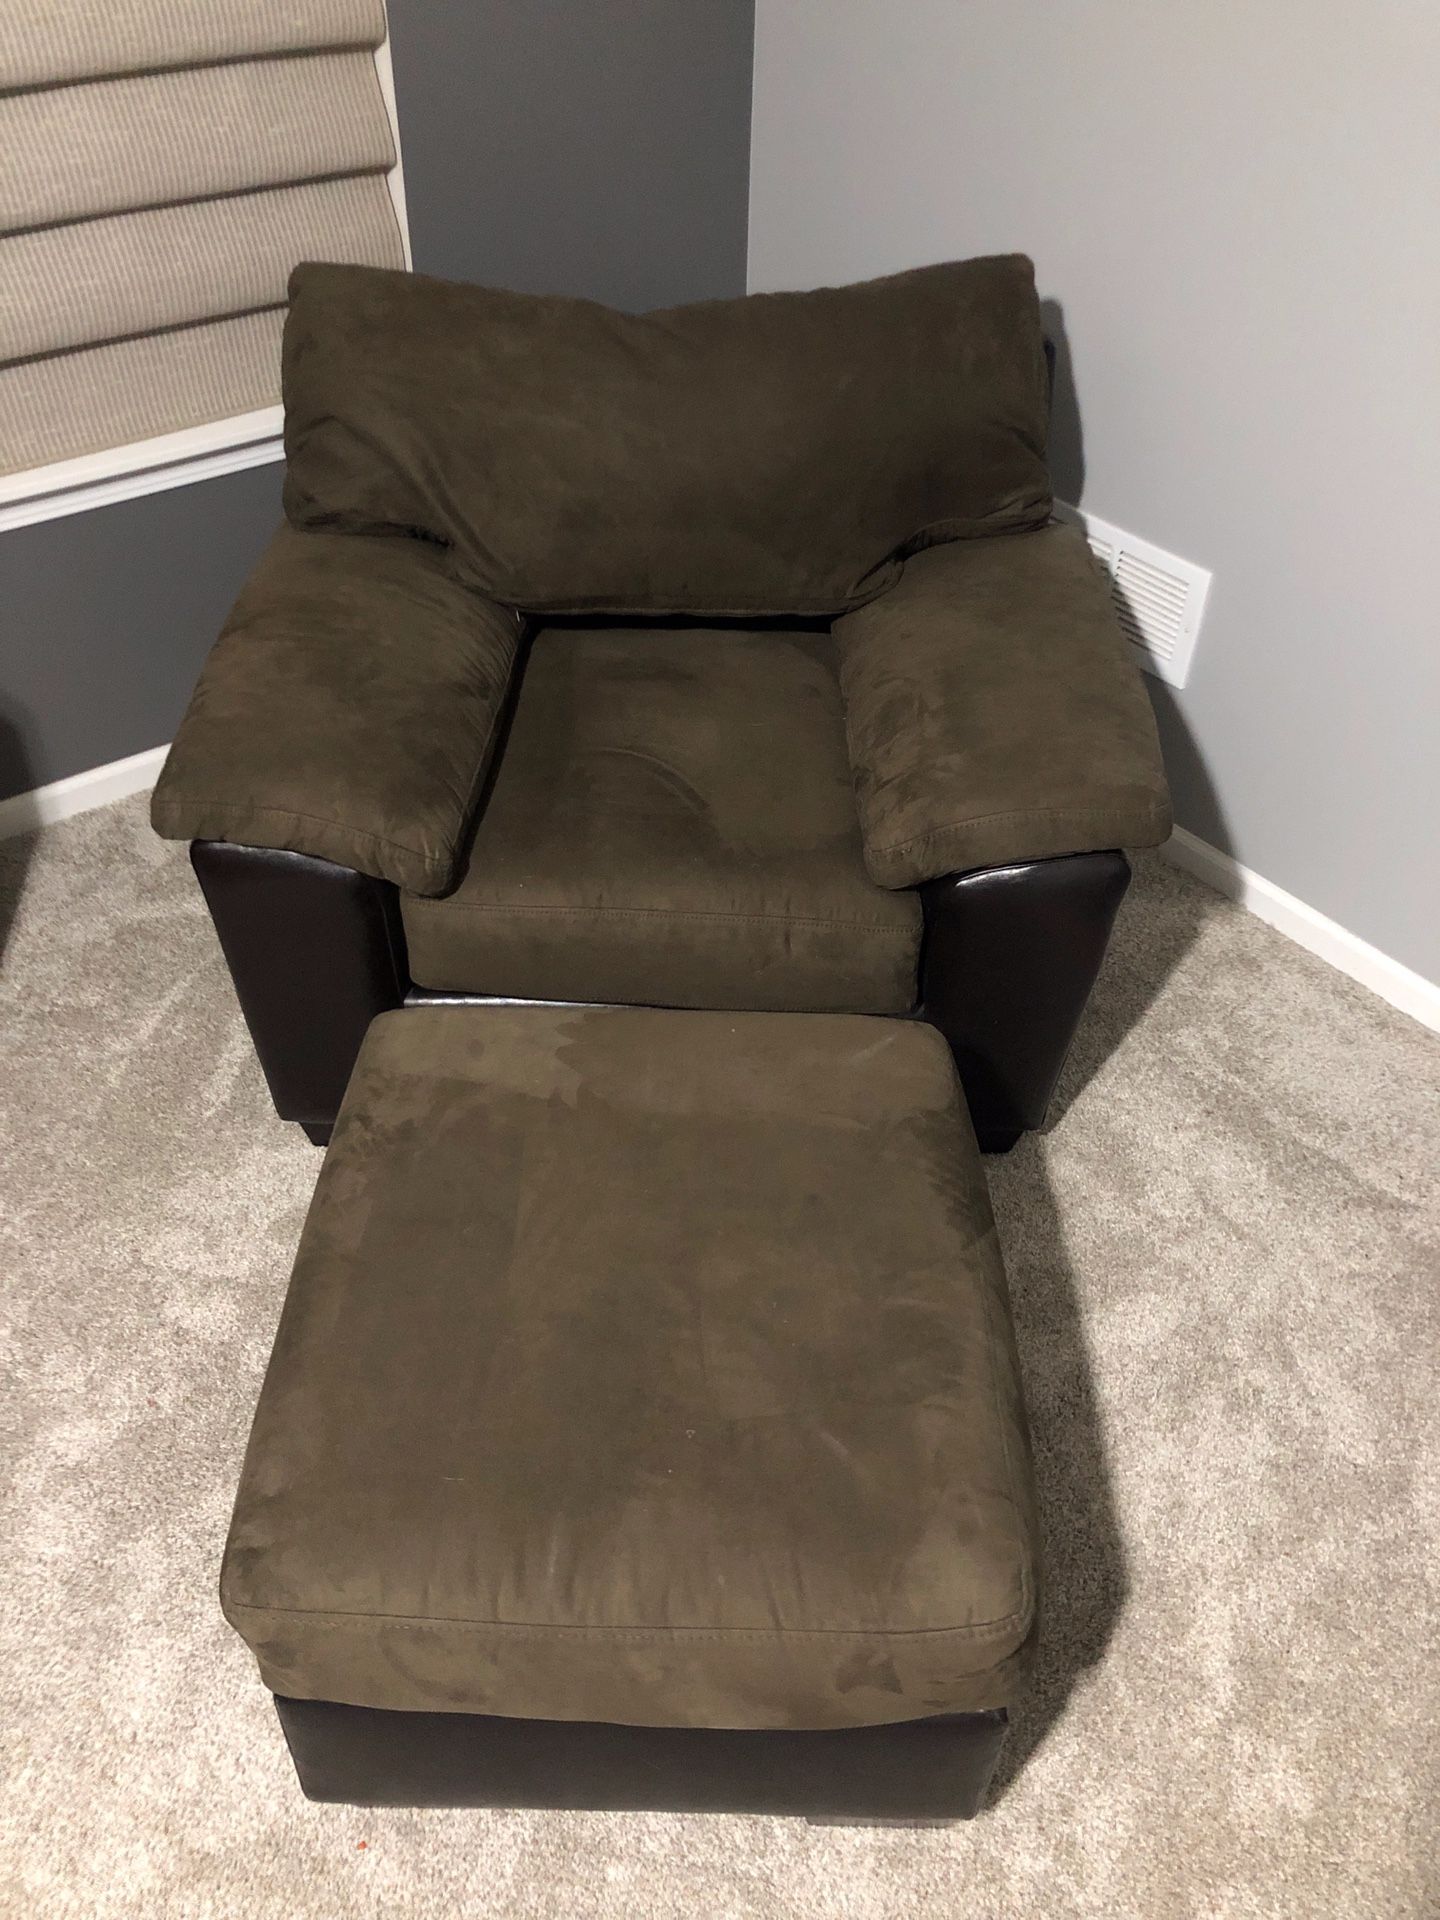 Suede Chaise Lounge Chair with Foot Rest